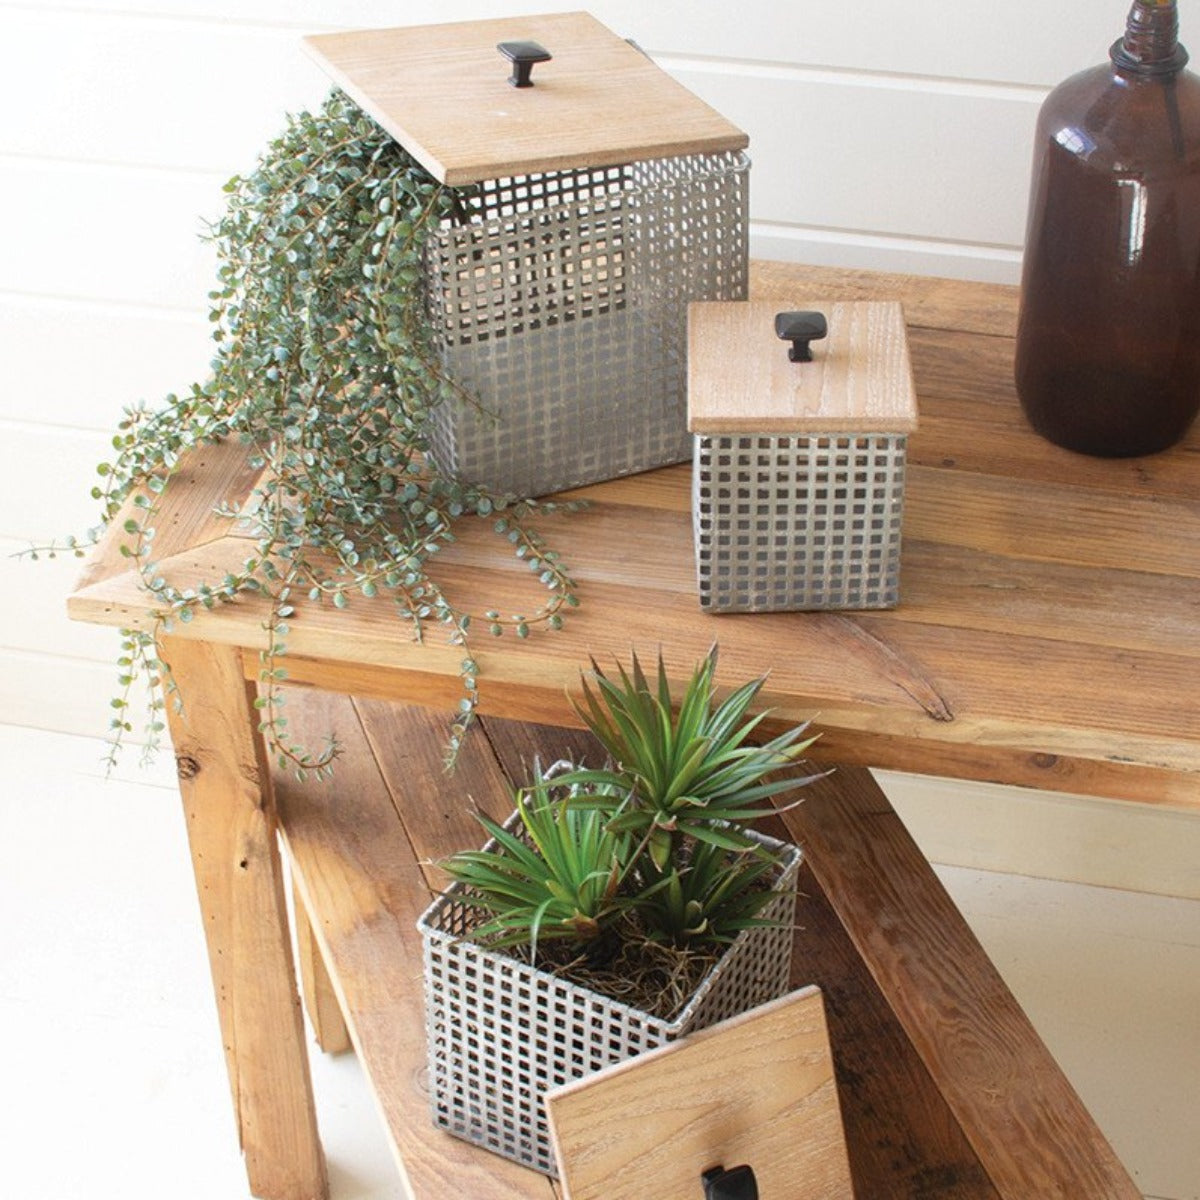 Rustic Metal and Wood Canisters